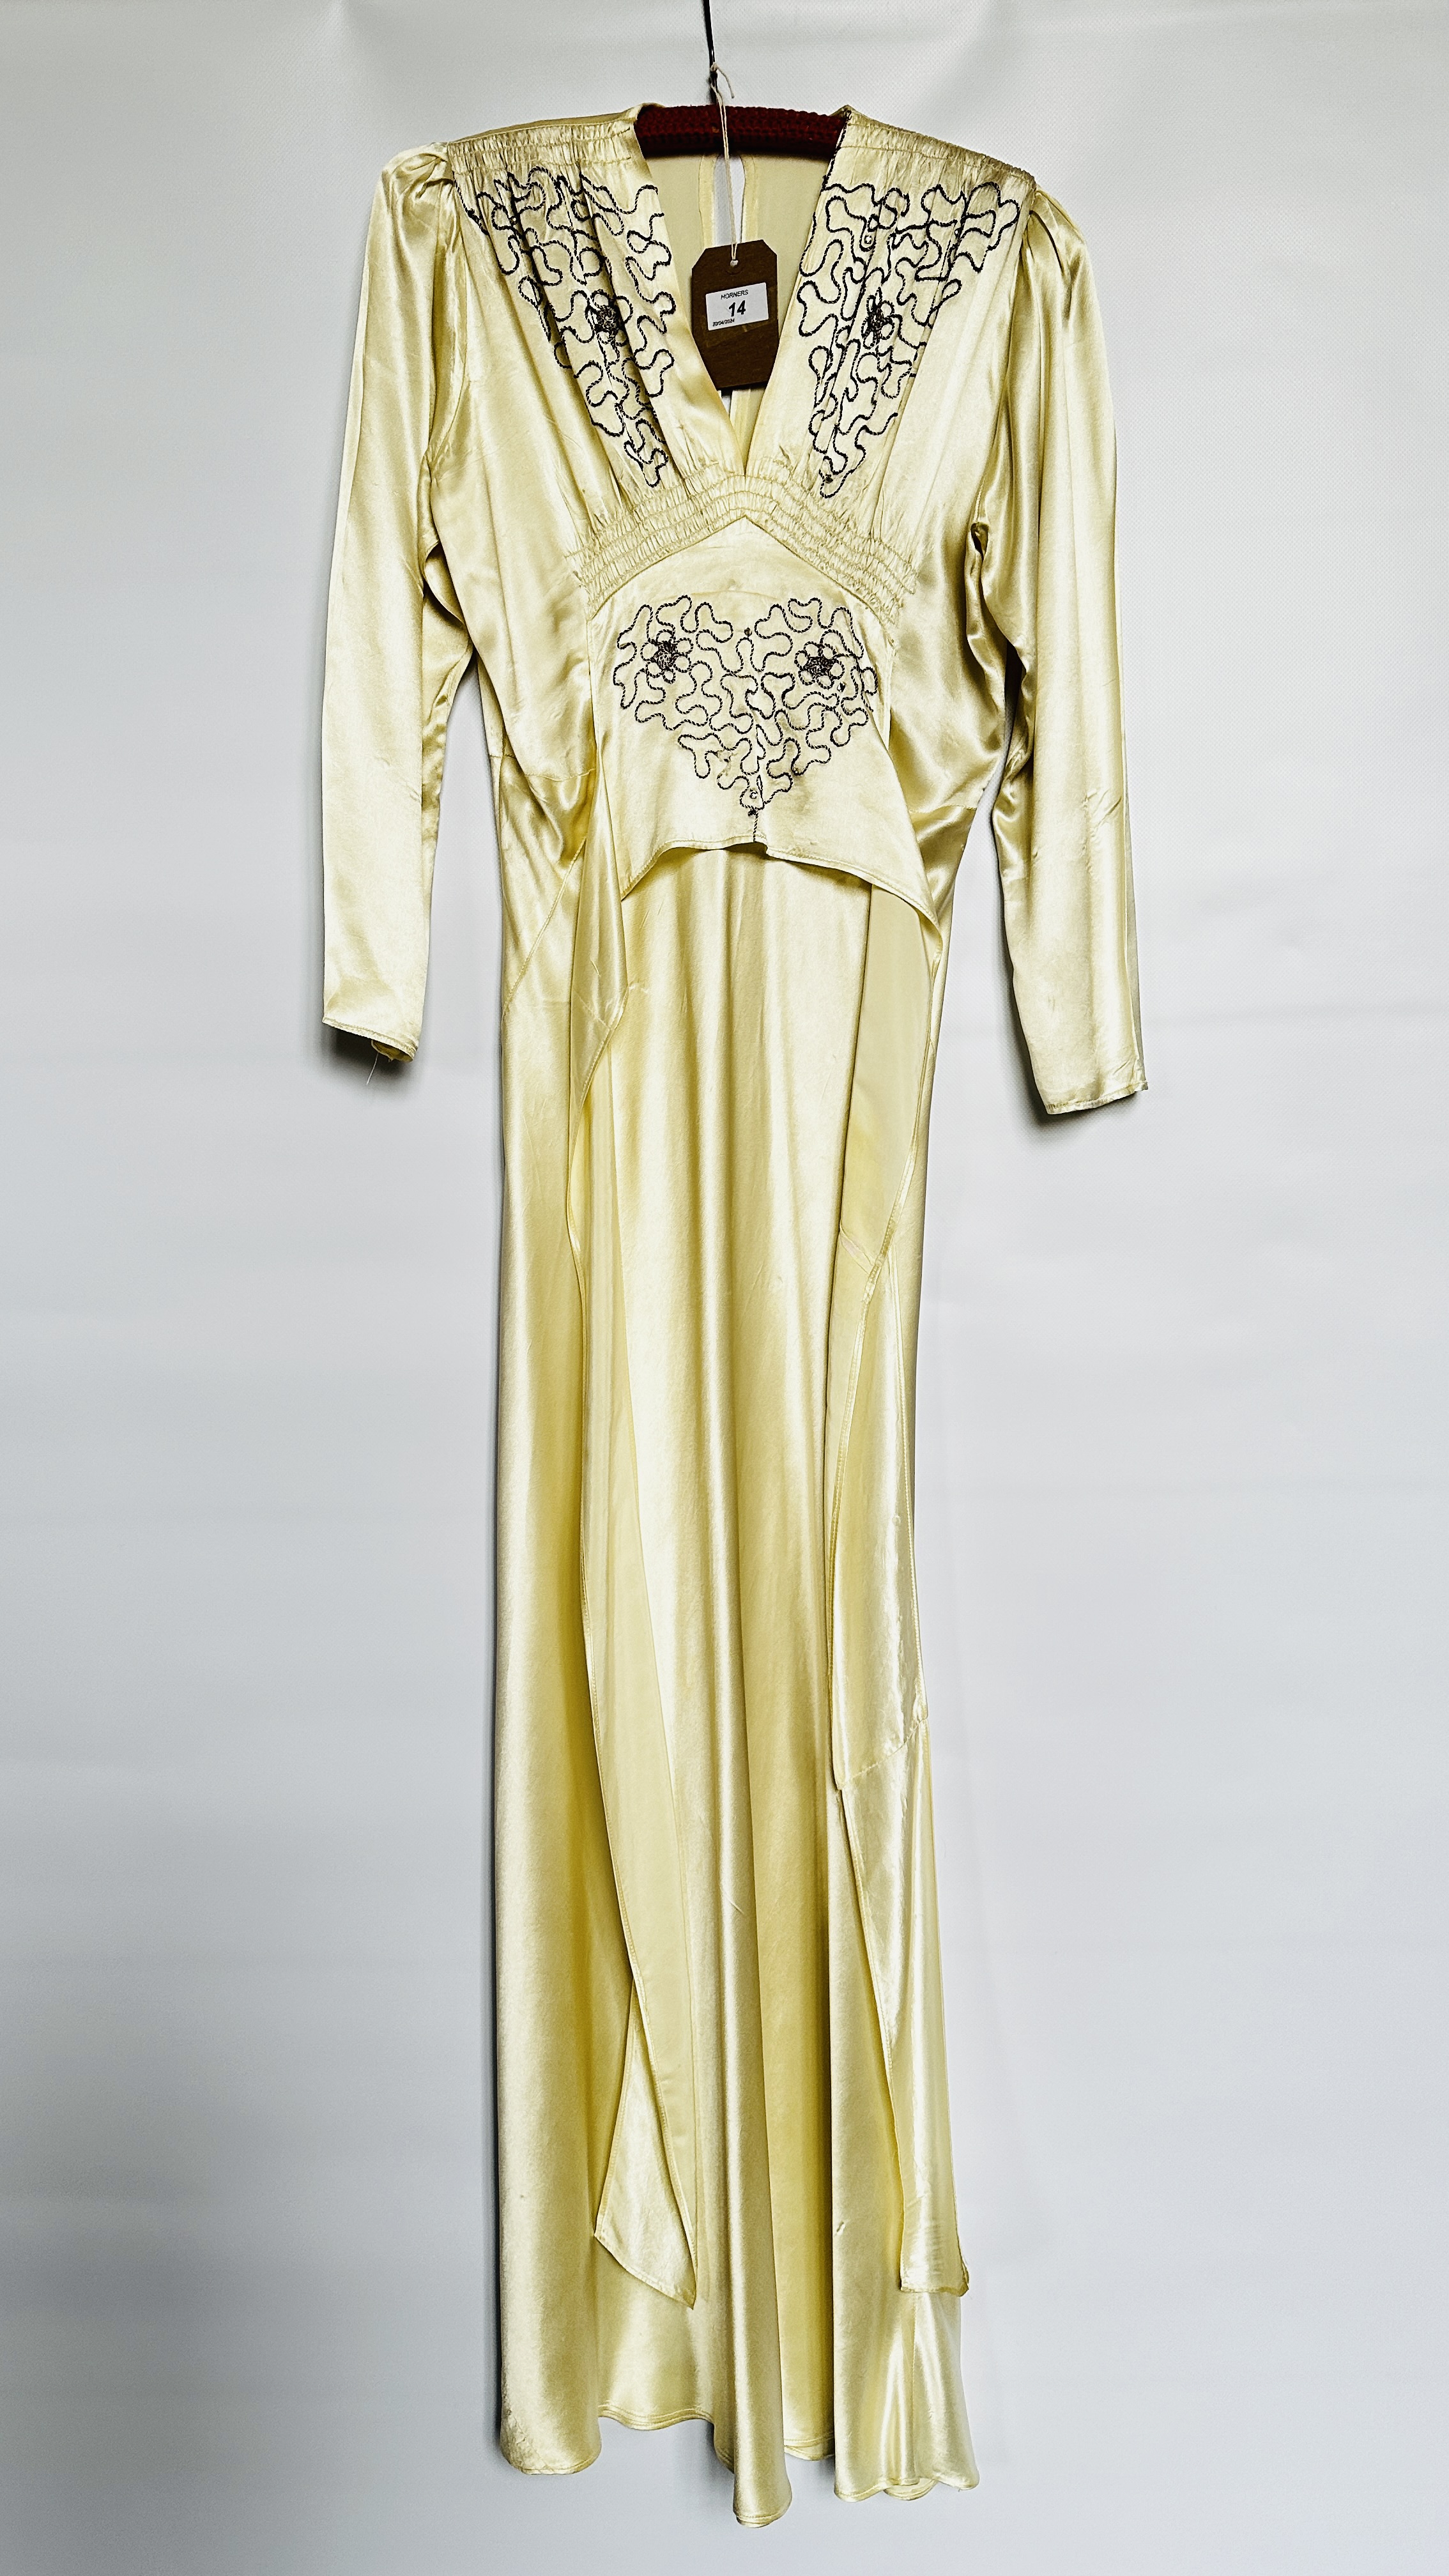 1940S CREAM SATIN GOWN, EMBROIDERED WAIST AND NECKLINE, LONG SLEEVES & BELT - A/F CONDITION,